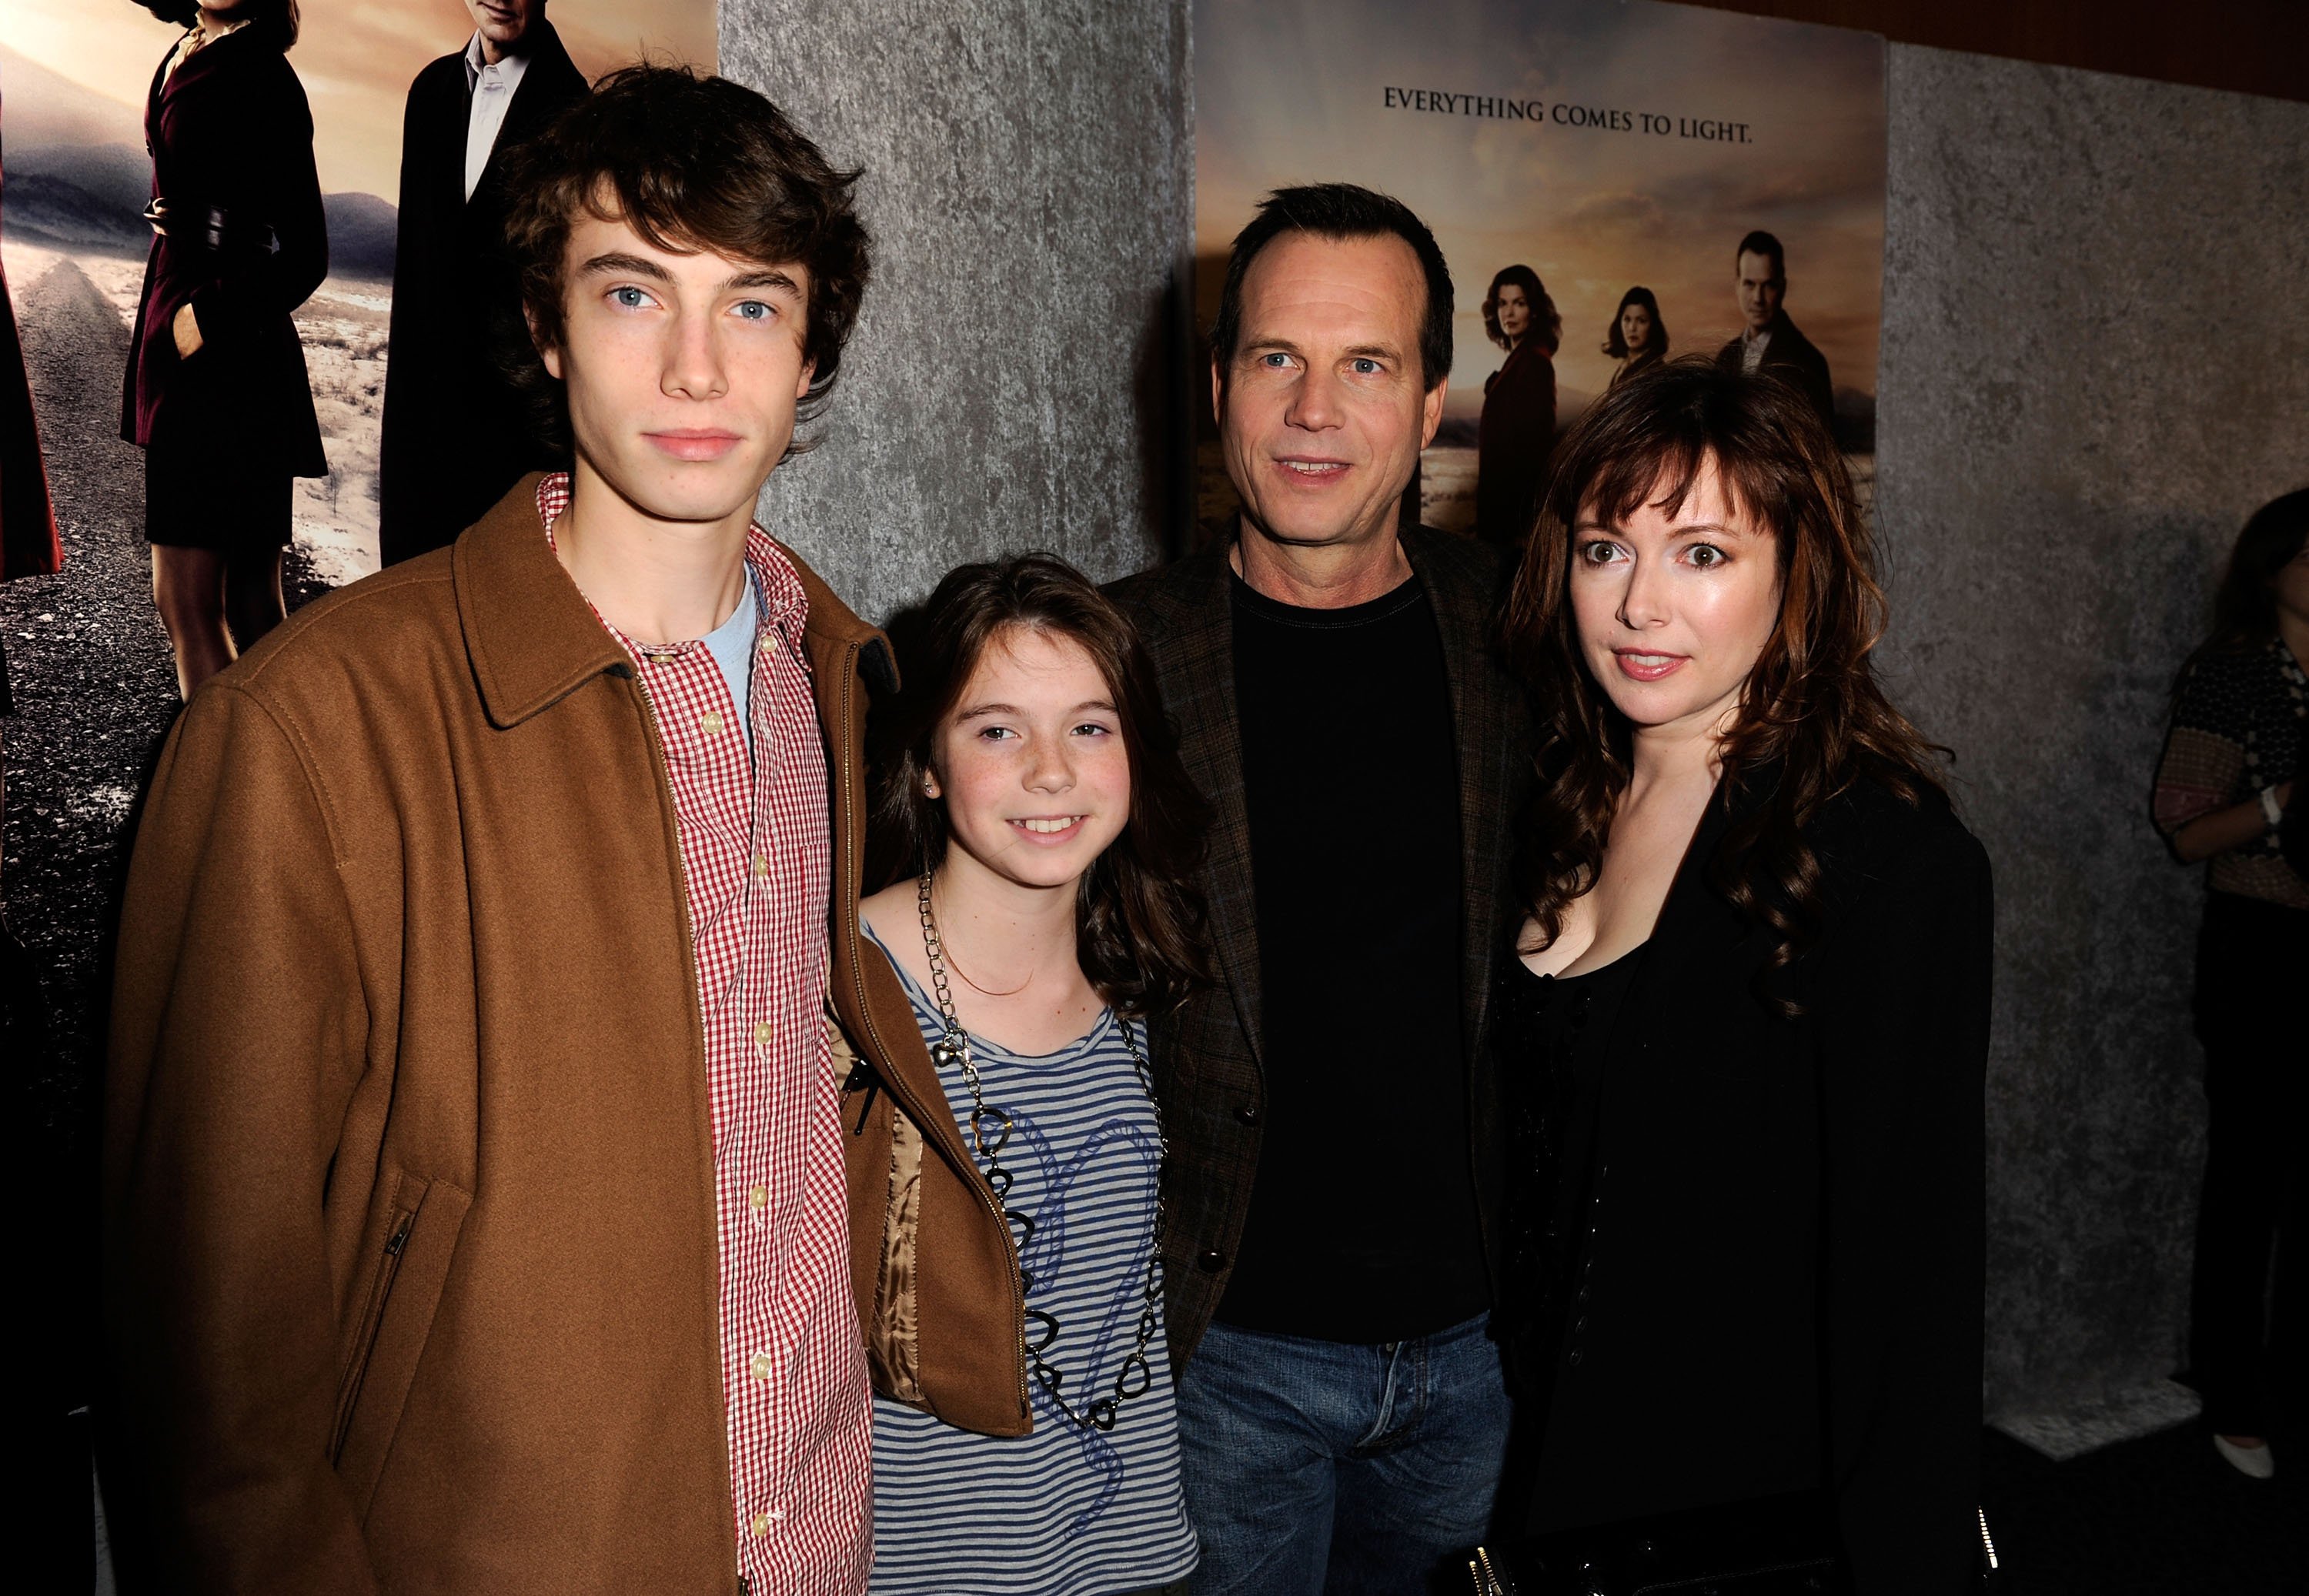 Bill Paxton with wife Louise and children James and Lydia at HBO's "Big Love" Season 5 premiere in 2011, in Los Angeles, California. | Source: Getty Images